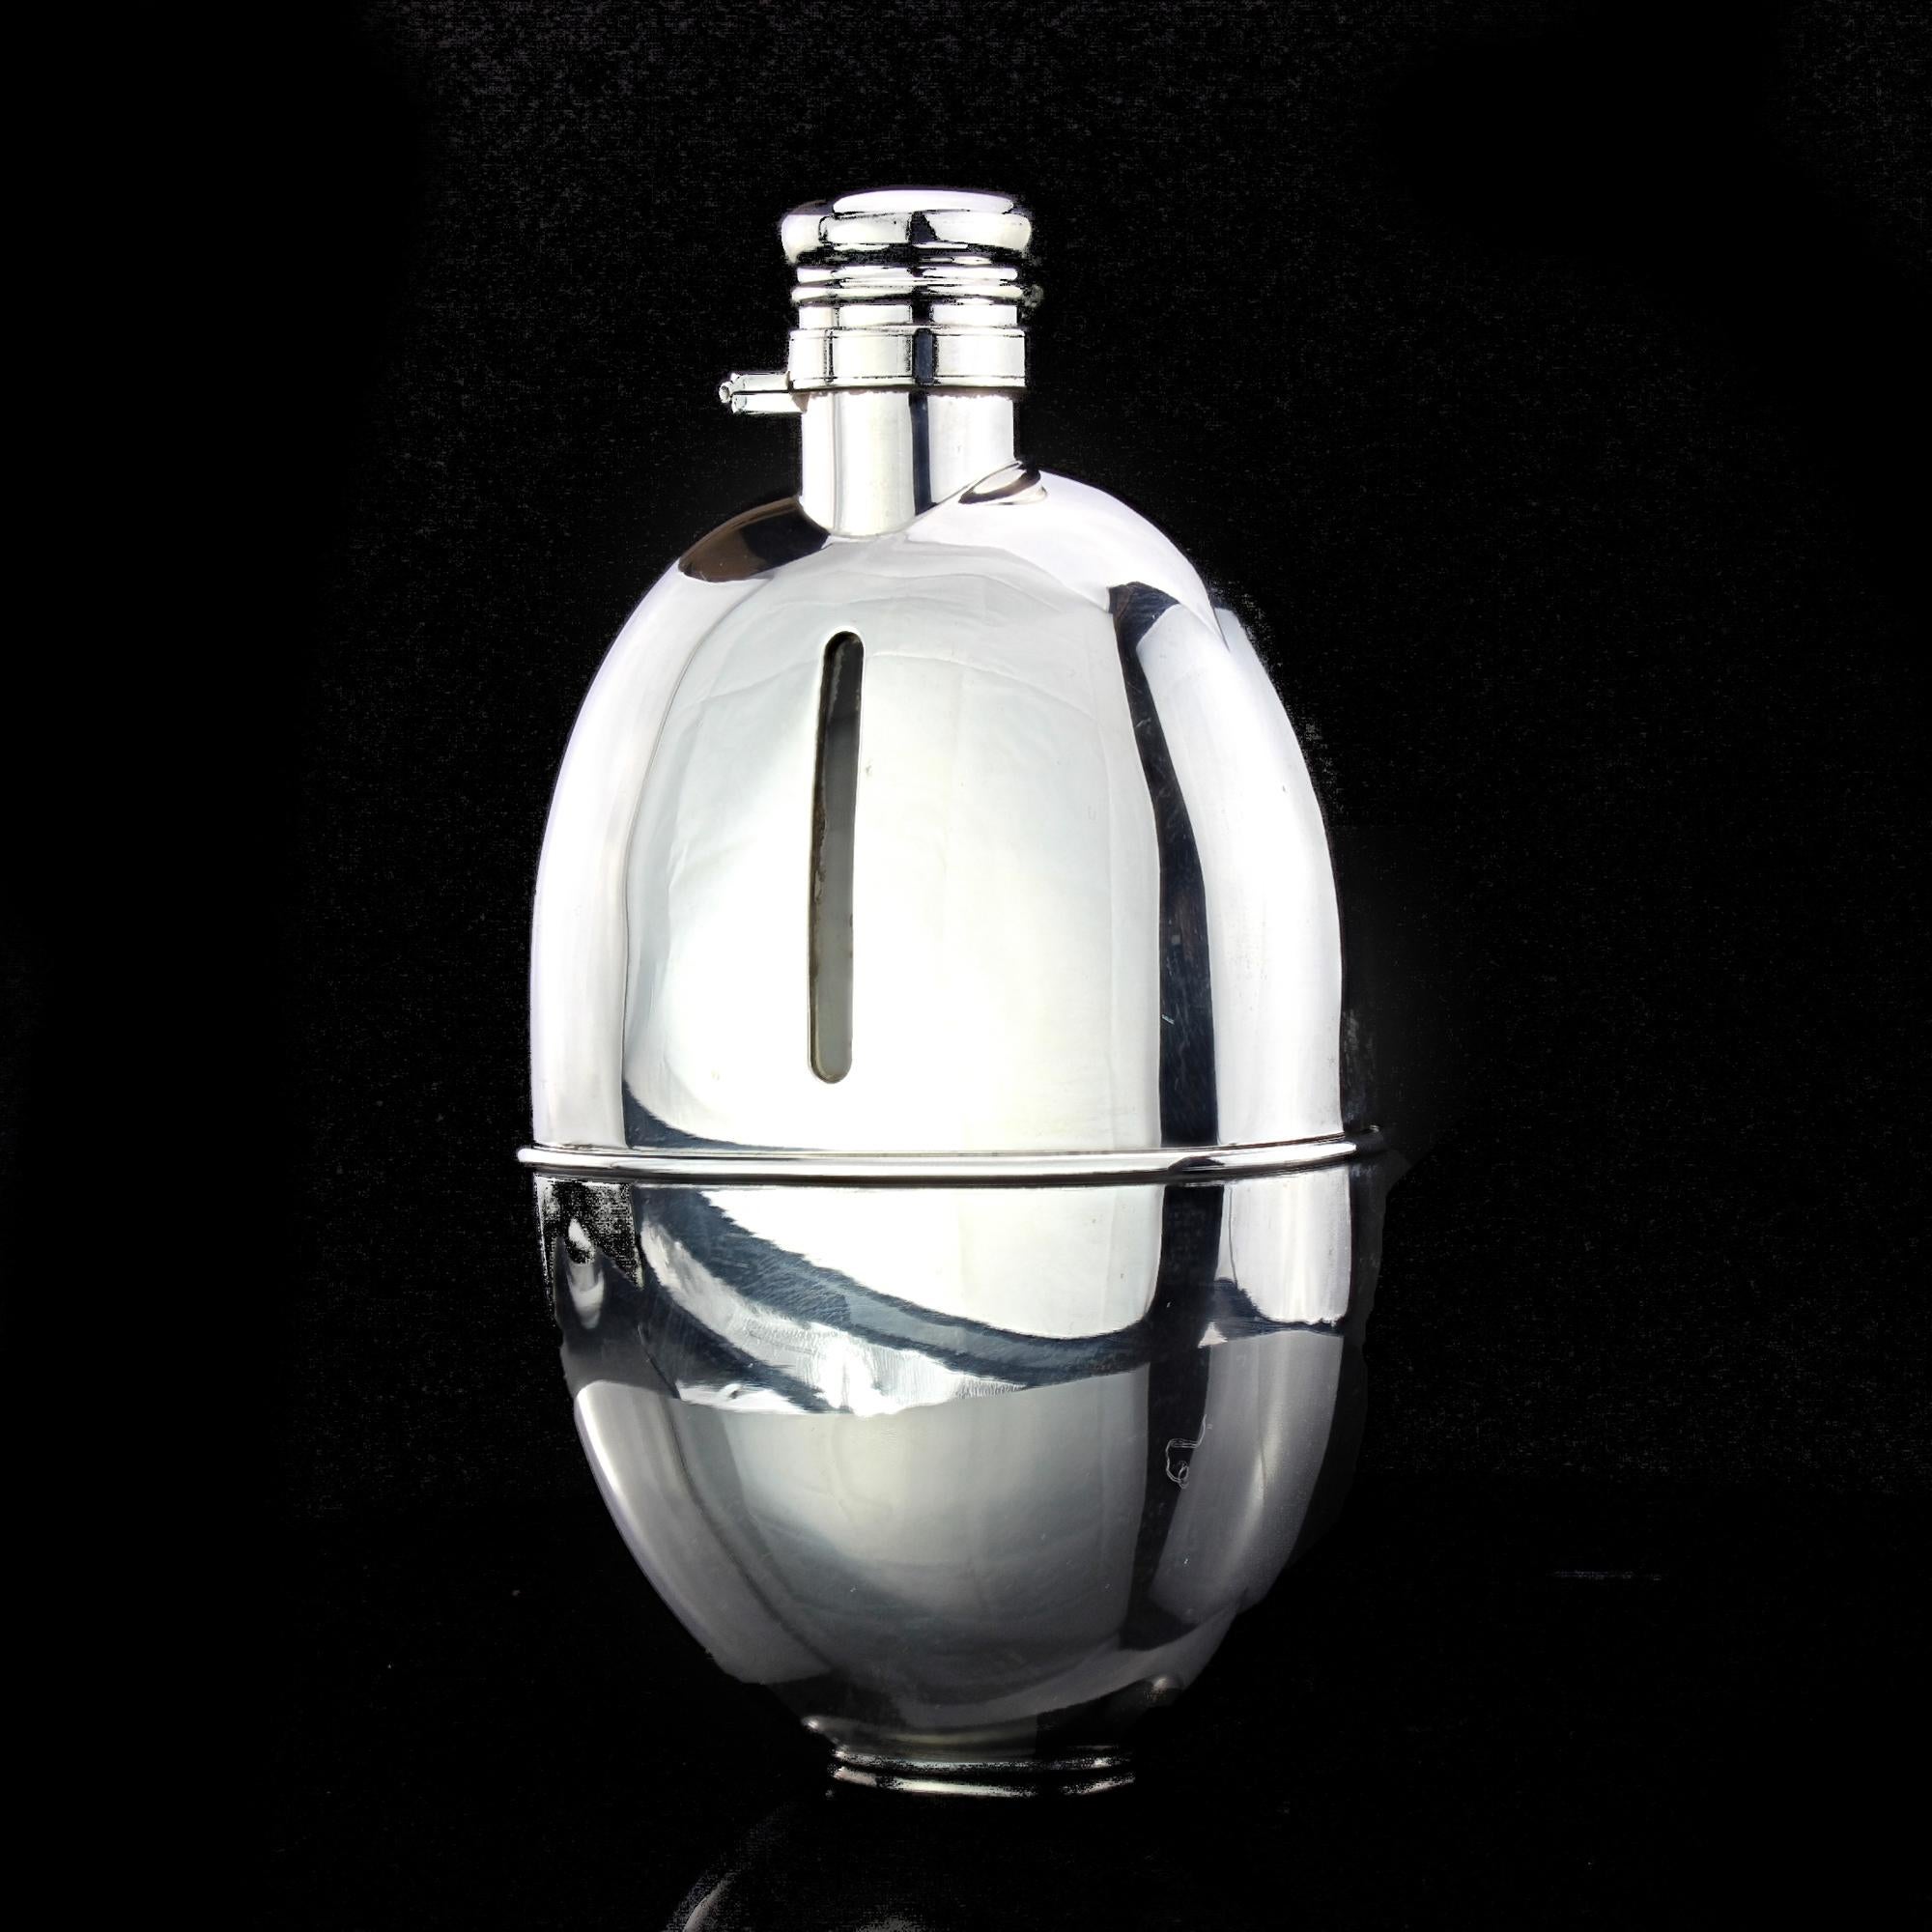 Antique Victorian silver flask
Maker: Sampson Mordan & Co.
Made in London, 1892

Dimensions:
Weight: 340 grams
Height 13.8 cm
Width 8.2 cm
Depth 3 cm

Condition: Minor wear from general usage and some signs of age, otherwise good overall